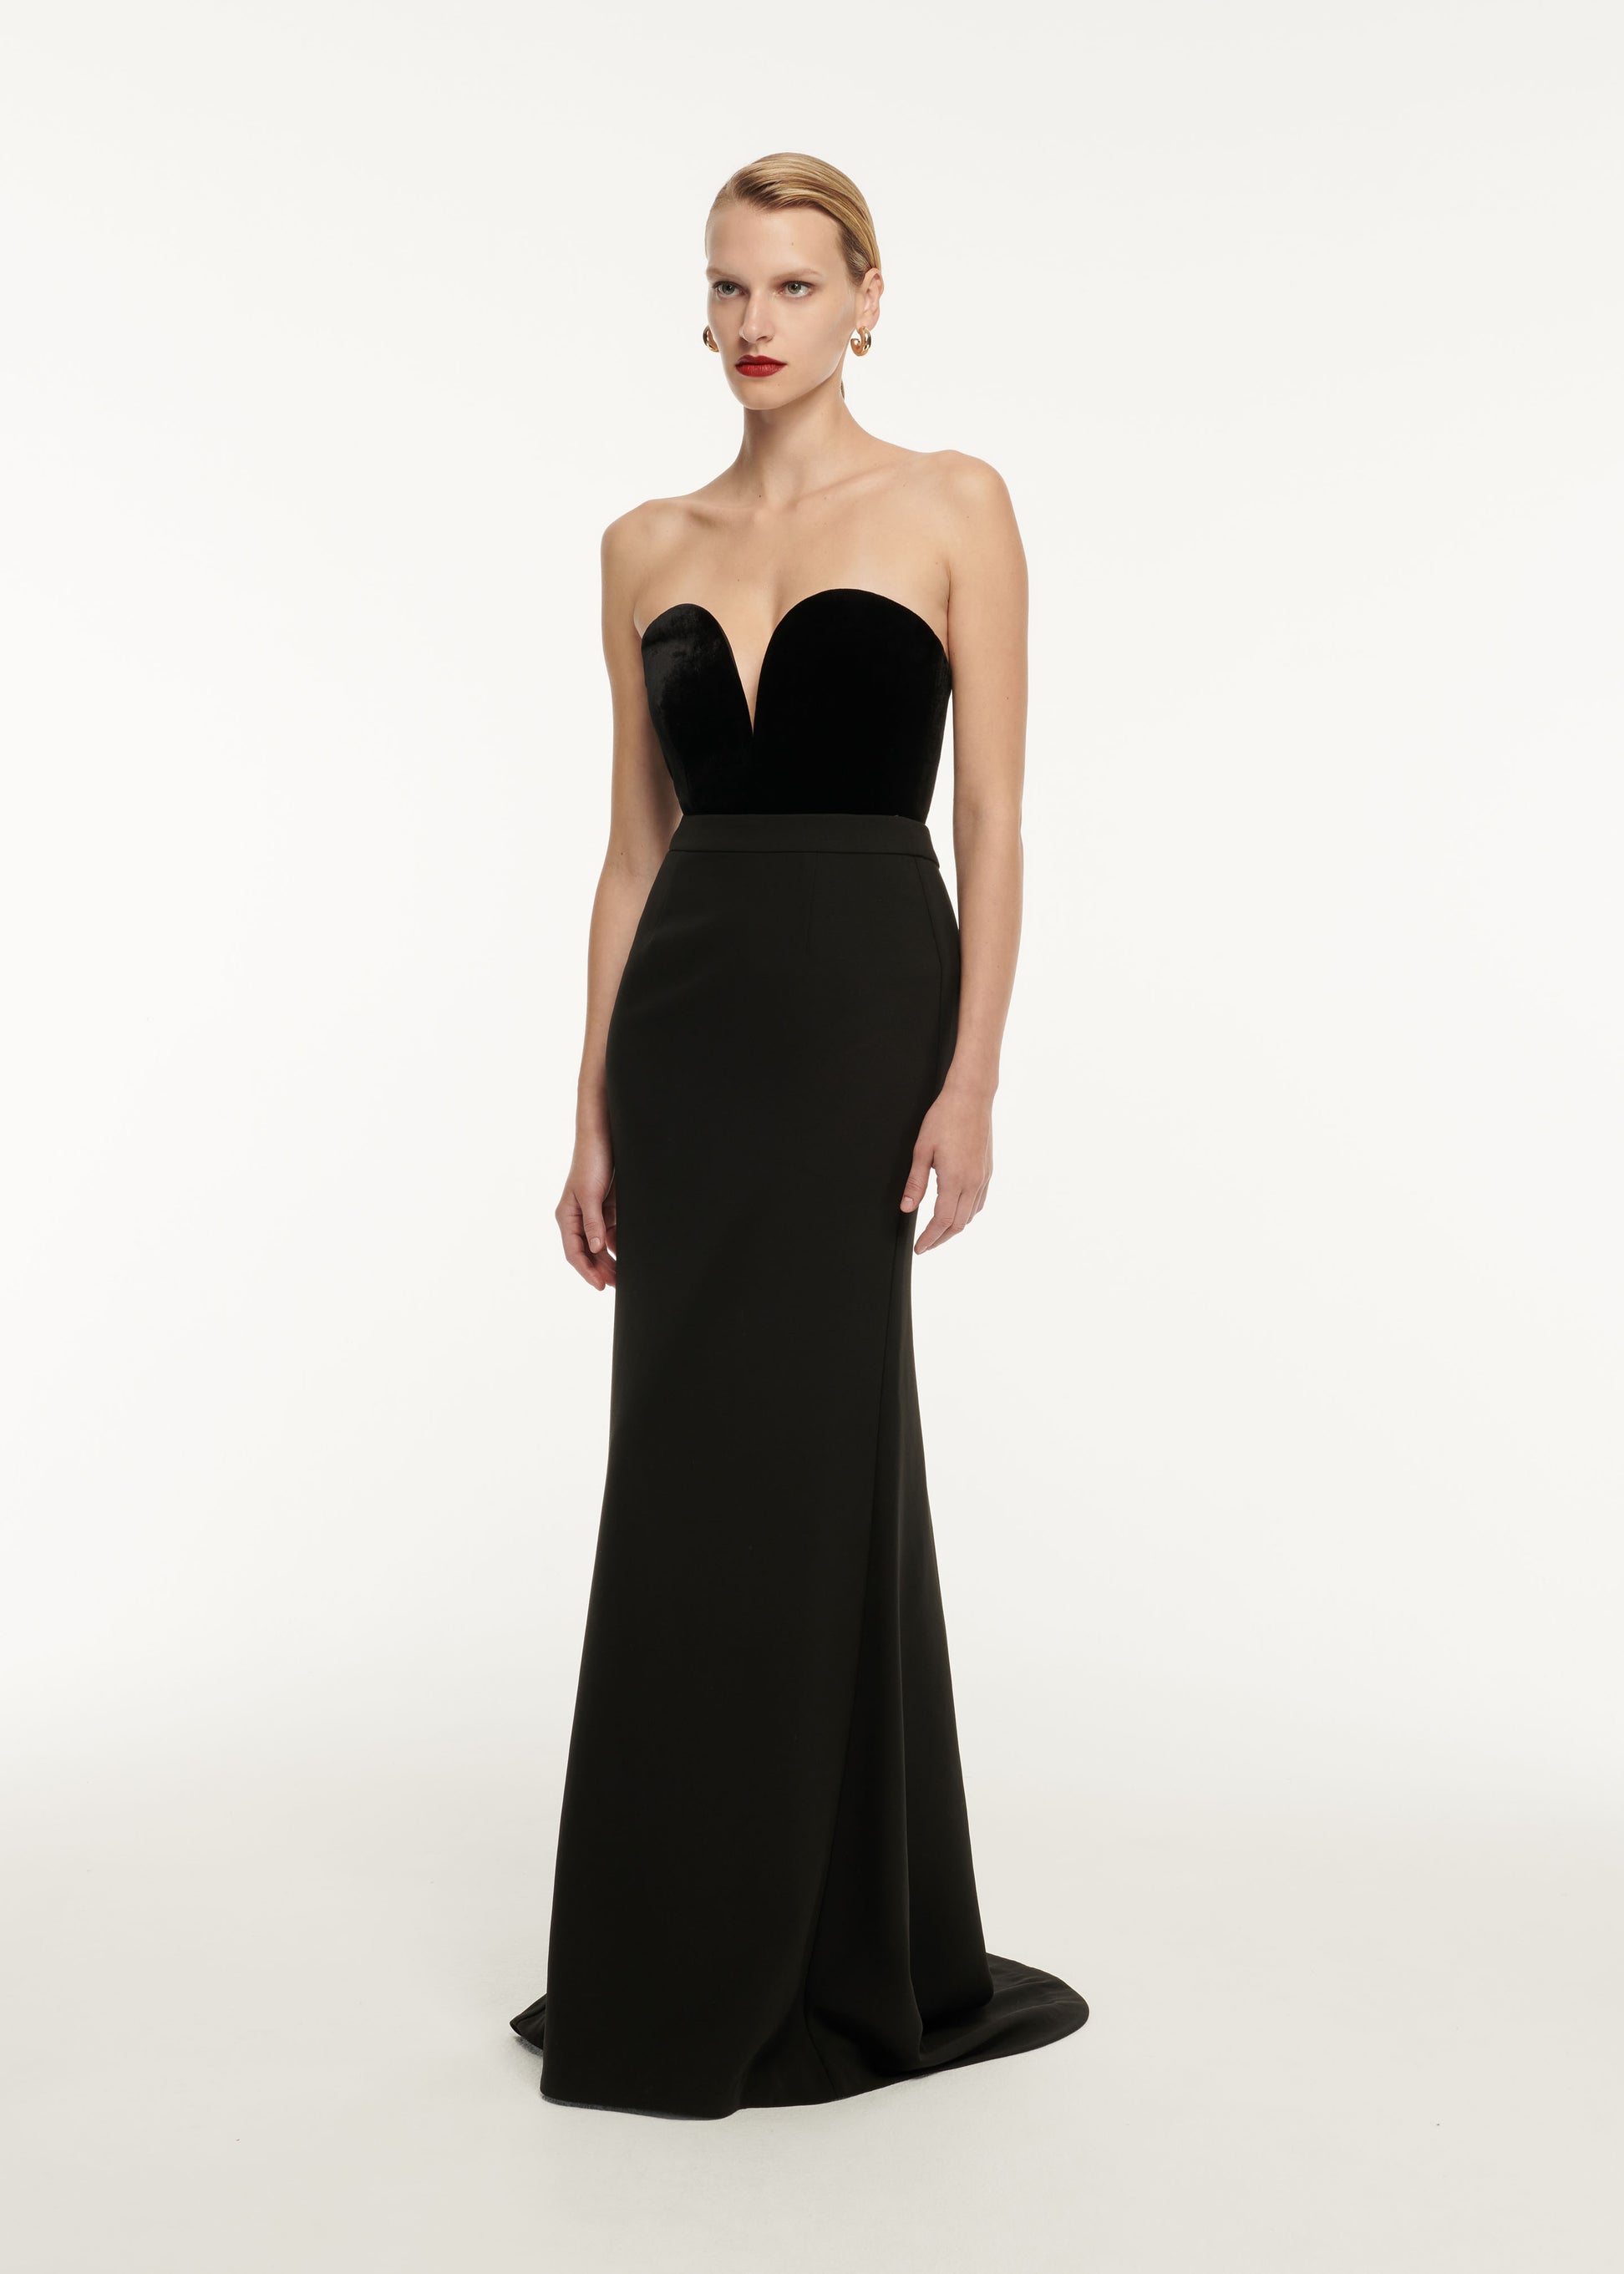 A woman wearing the Strapless Velvet Top Black